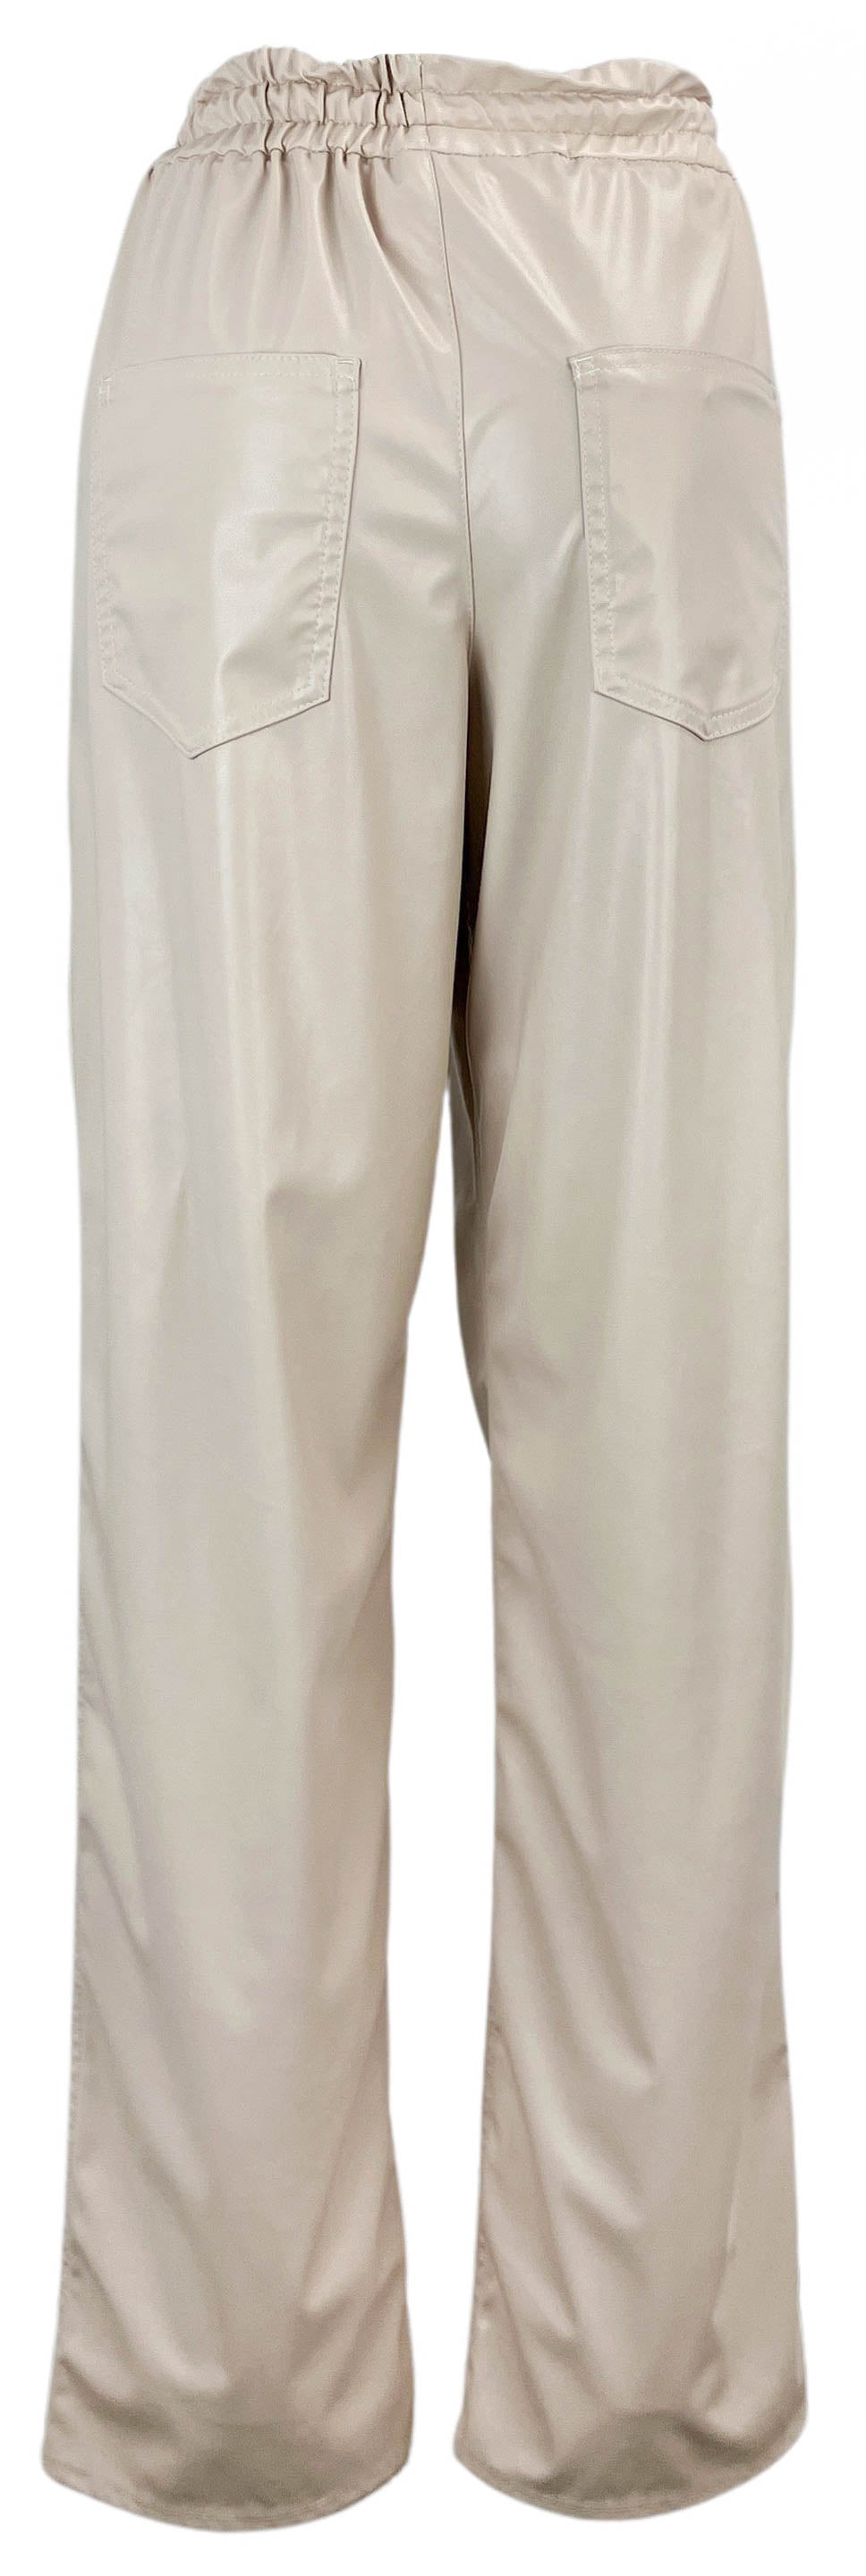 Isabel Marant Étoile Brina Faux Leather Pants in Chalk - Discounts on Isabel Marant at UAL